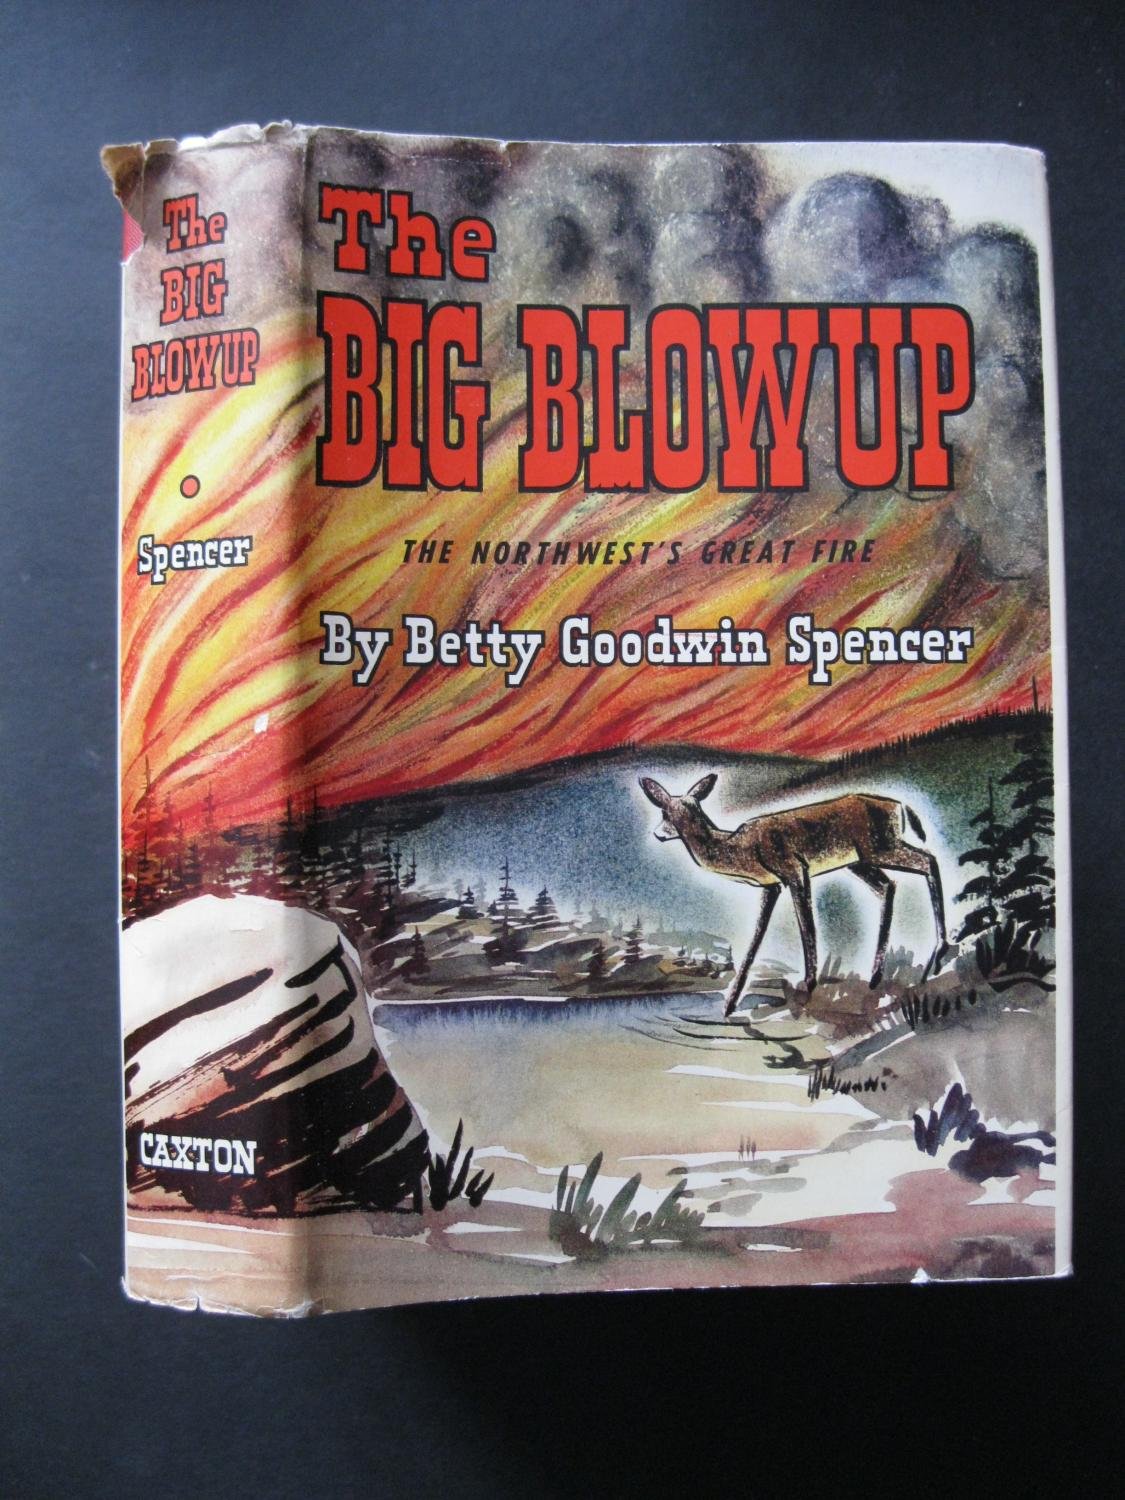 The big blowup (book cover)